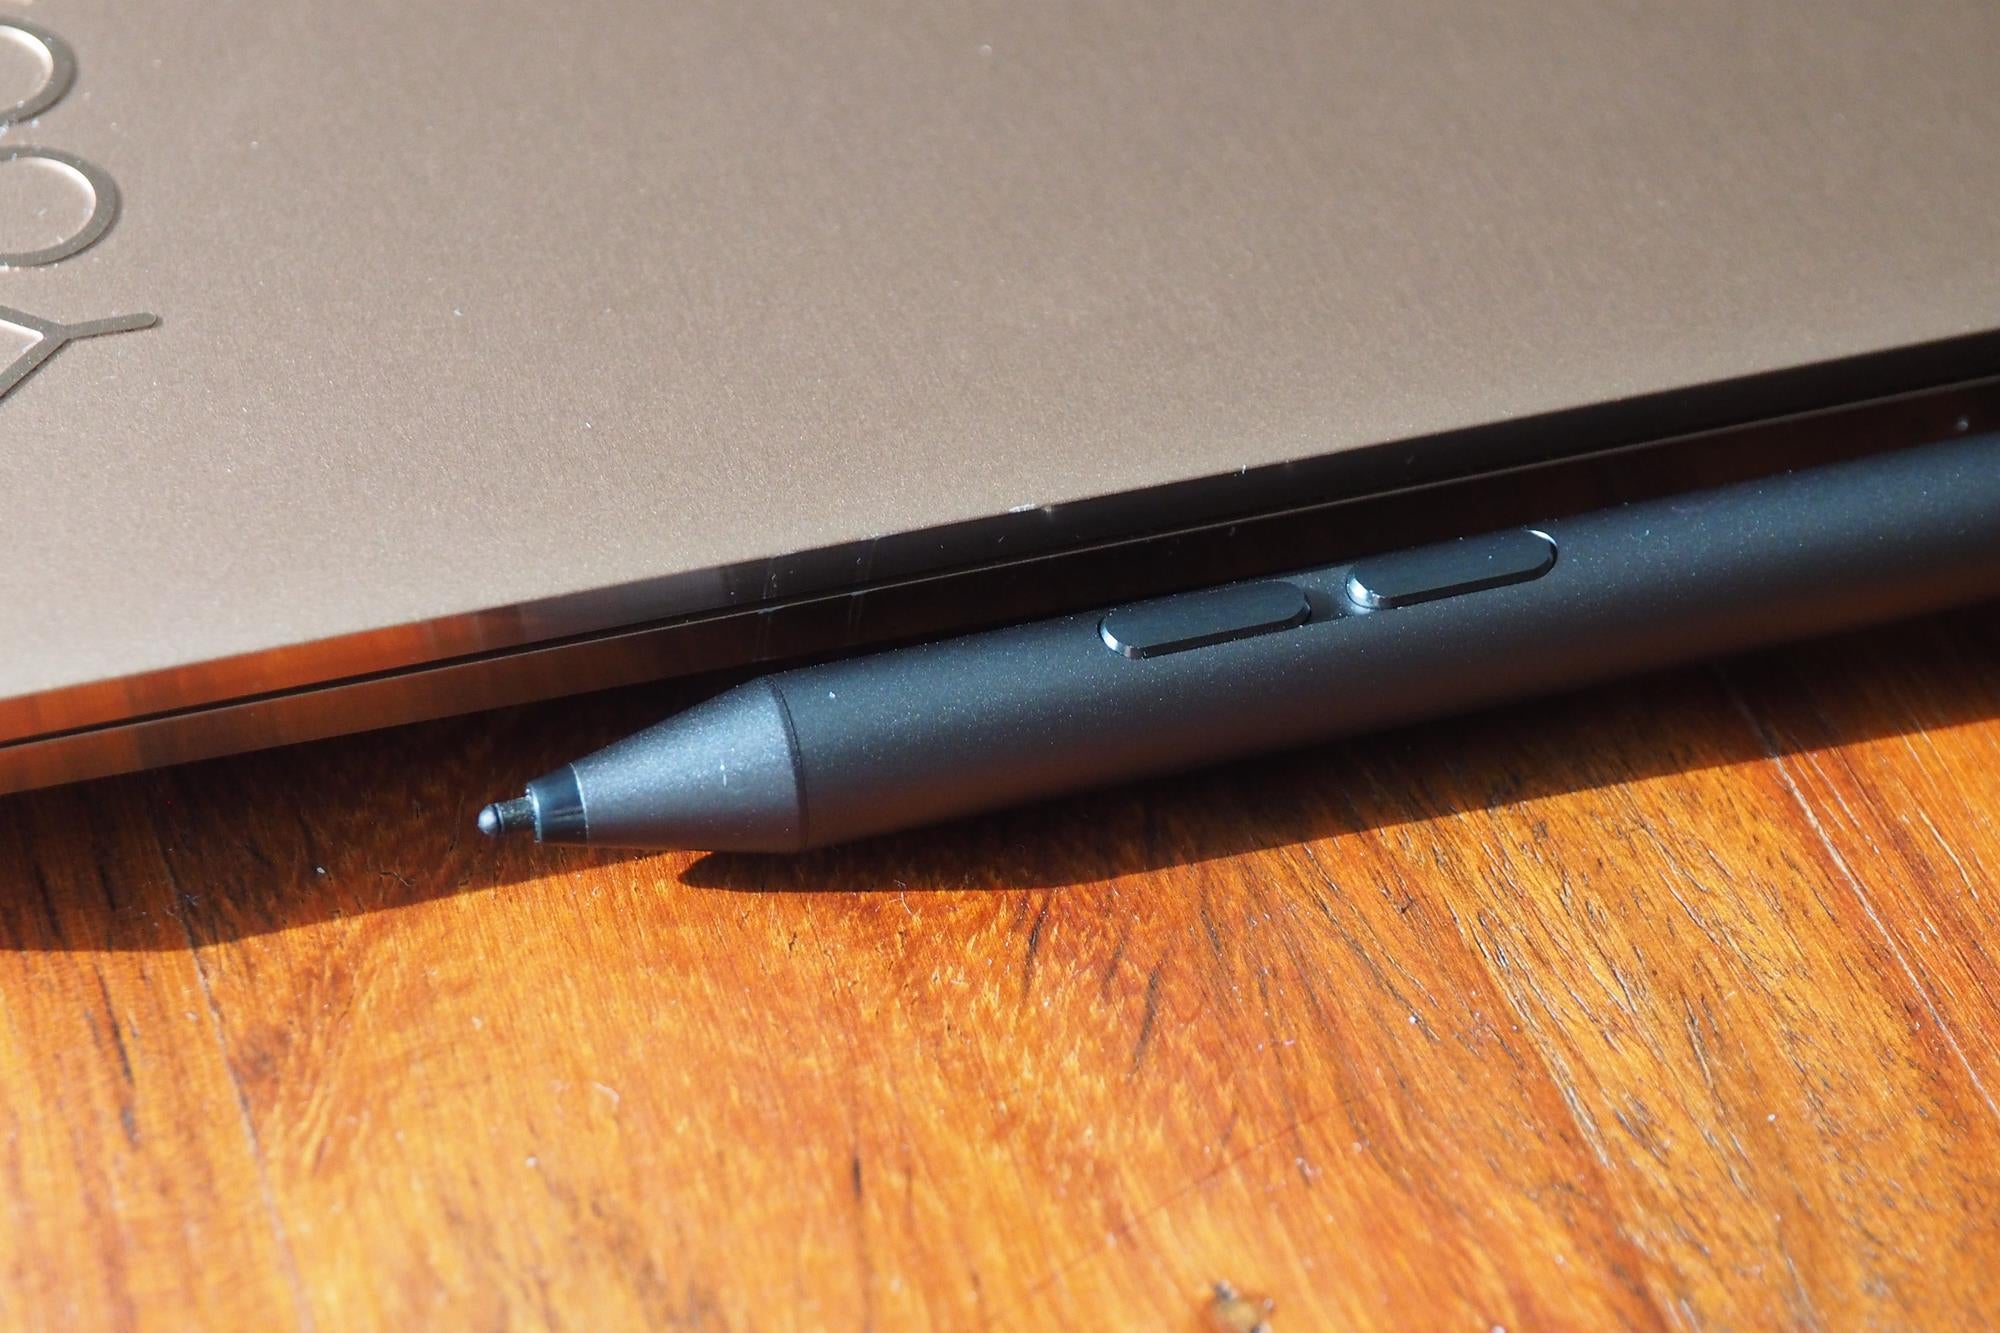 Close-up of Lenovo Yoga 920 with active pen on wooden surface.